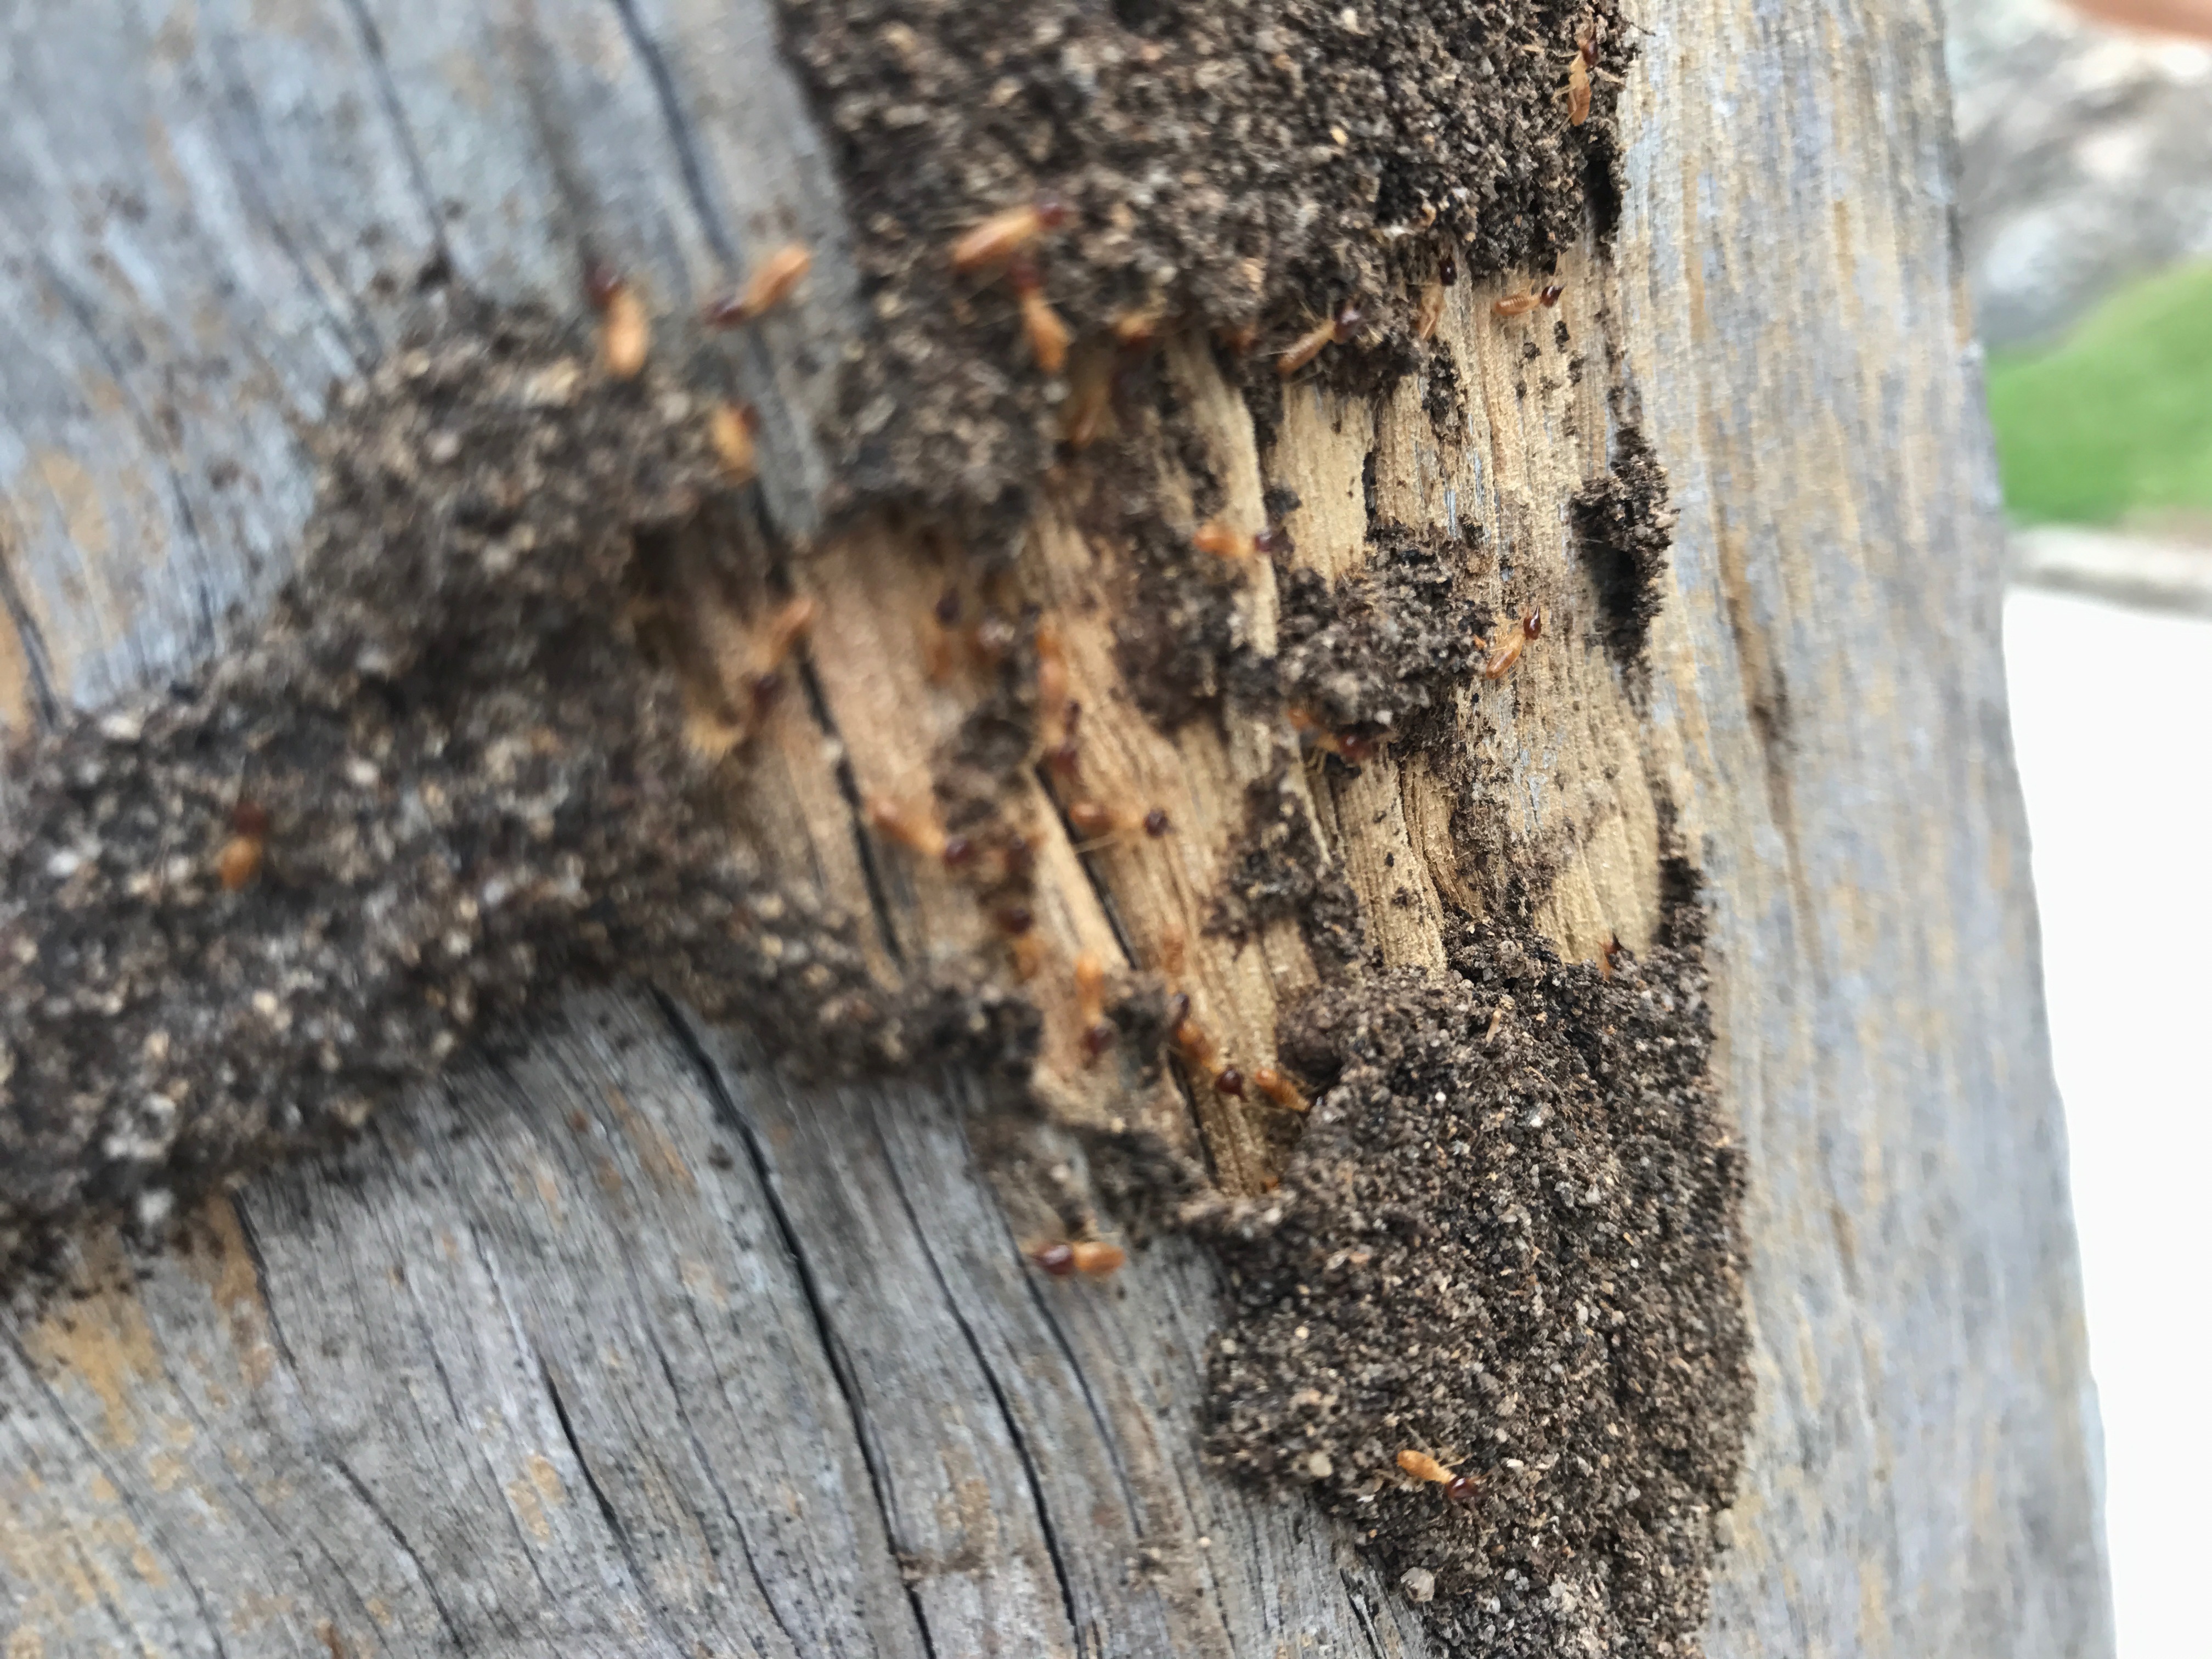 Termites and termite damage in Merewether